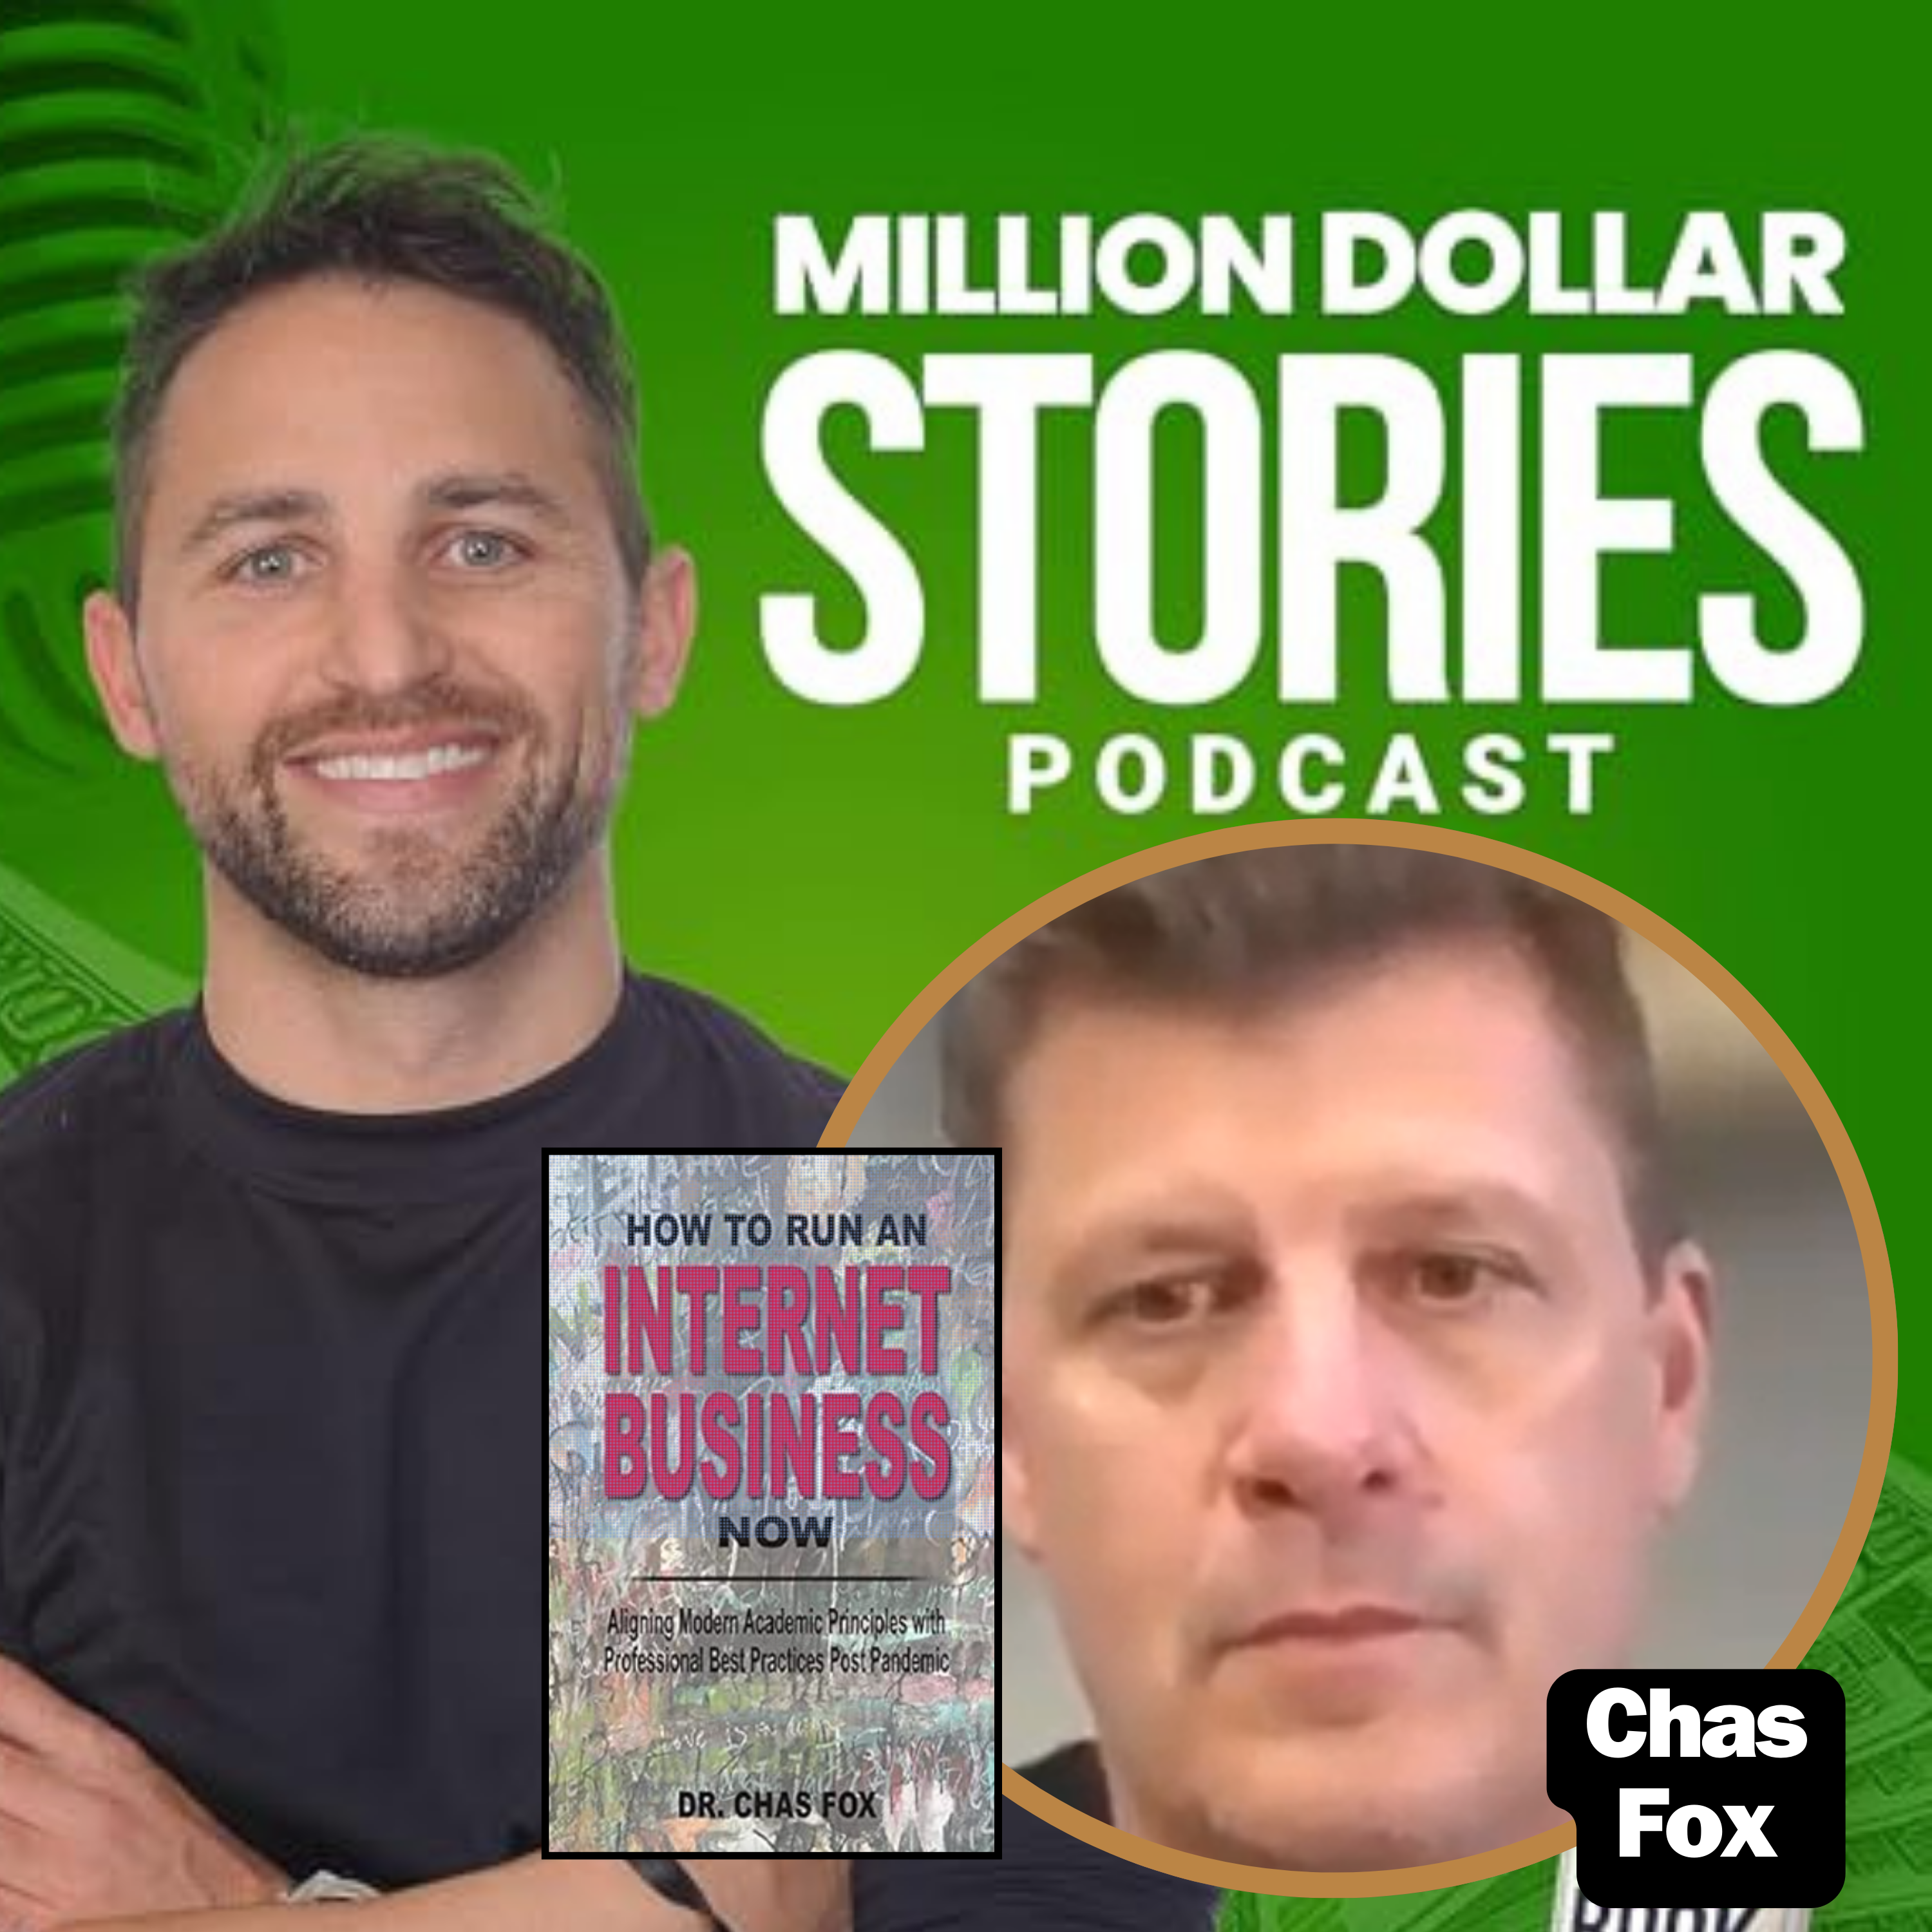 Chas Fox – Author of “How to Run Internet Business Now”